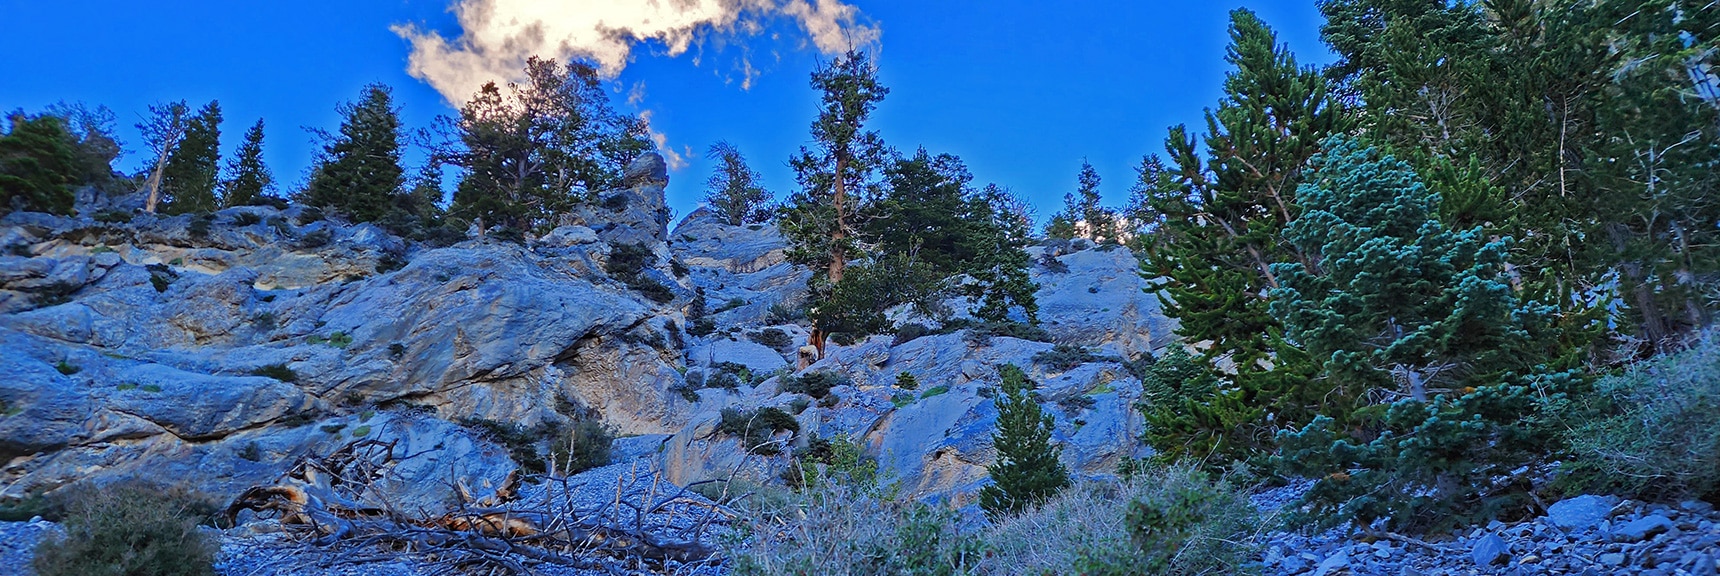 May Be Next Canyon North, Forested| Mummy Mountain Head from Lee Canyon Road | Mt Charleston Wilderness | Spring Mountains, Nevada